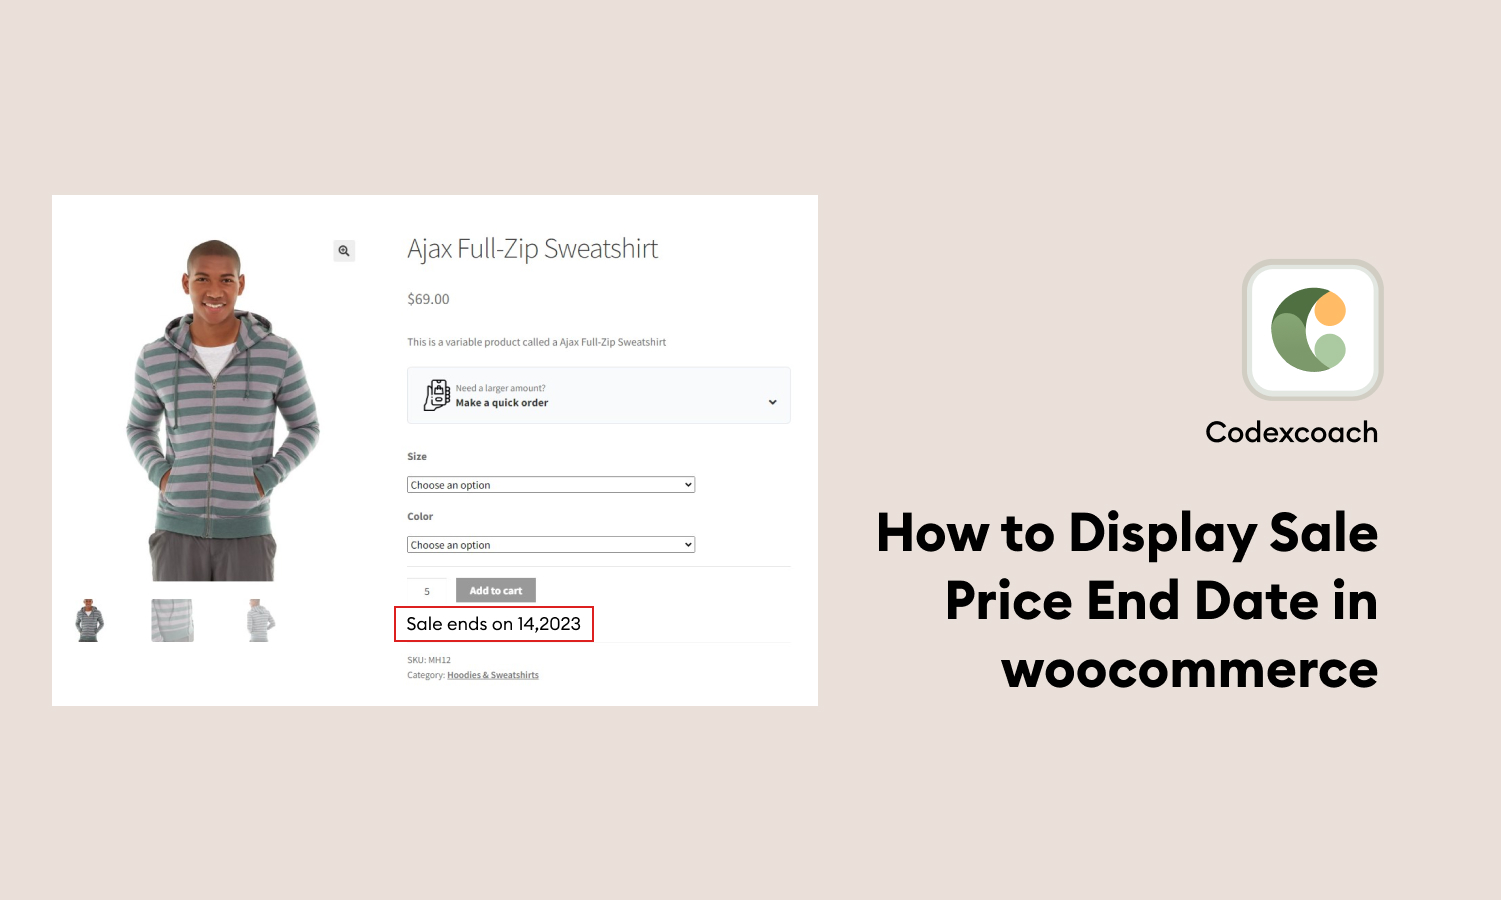 How to Display Sale Price End Date in woocommerce